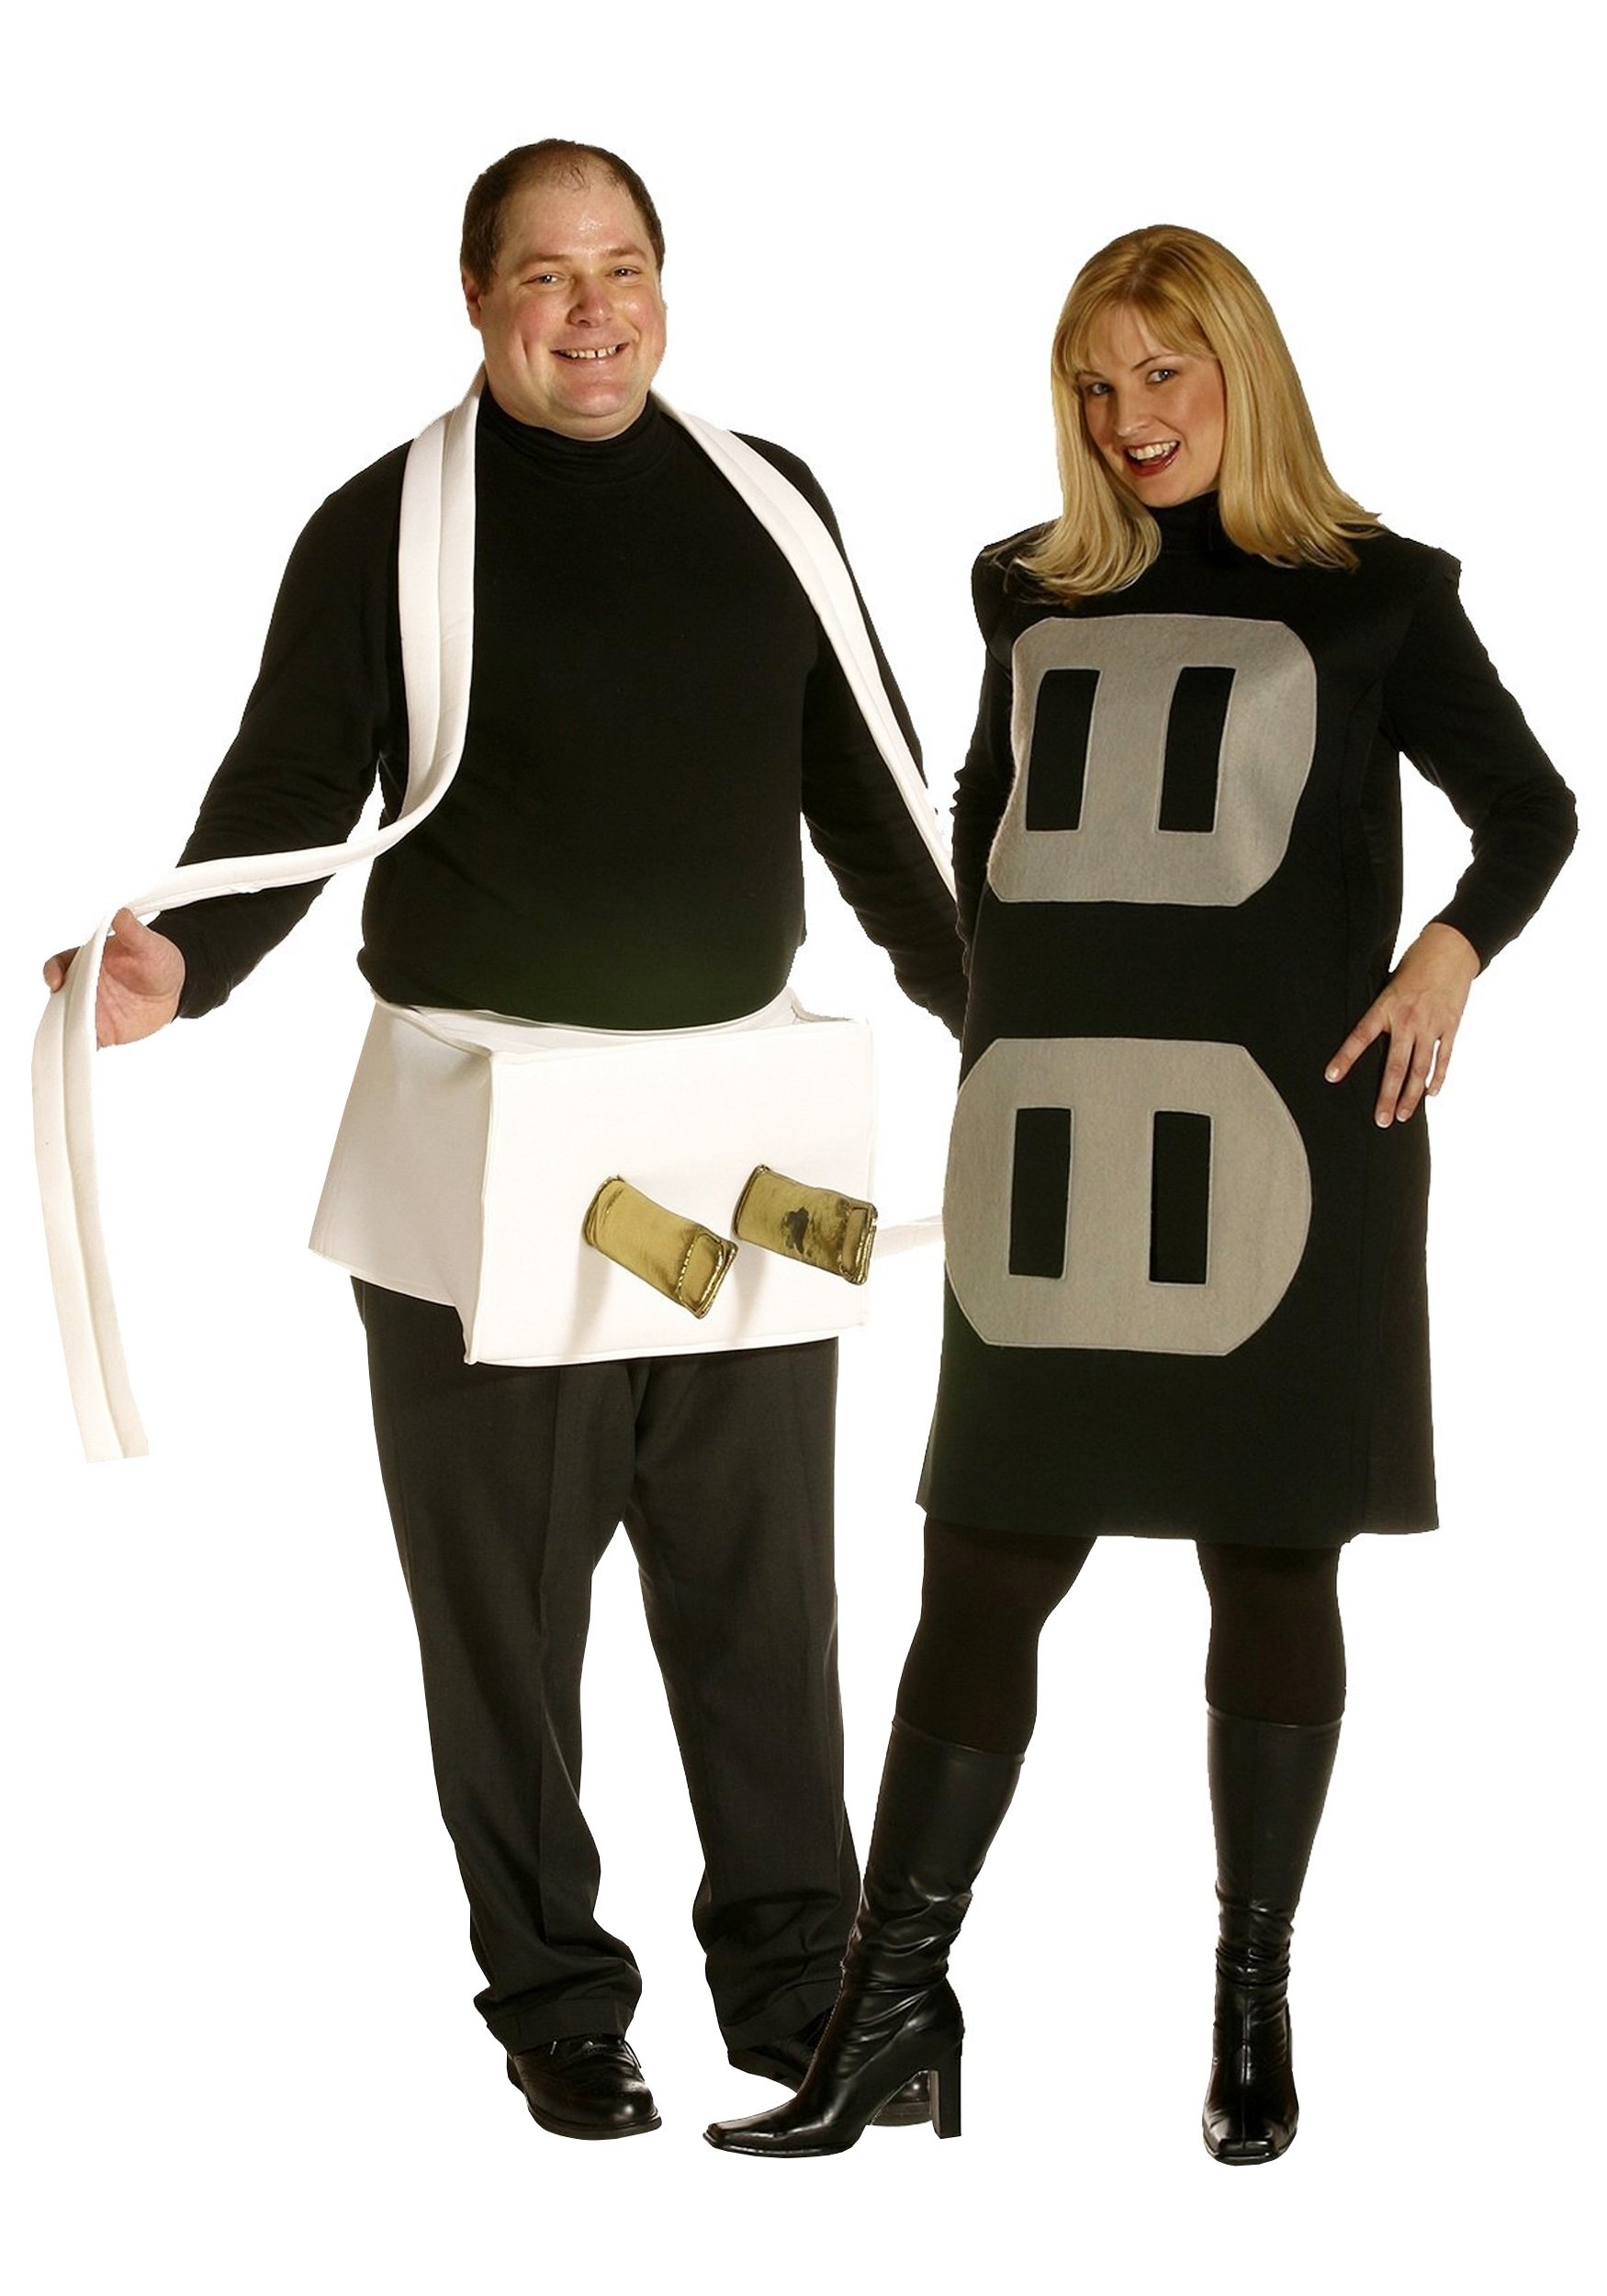 10 Most Popular His And Her Halloween Costume Ideas plus size plug and socket costume 5 2022